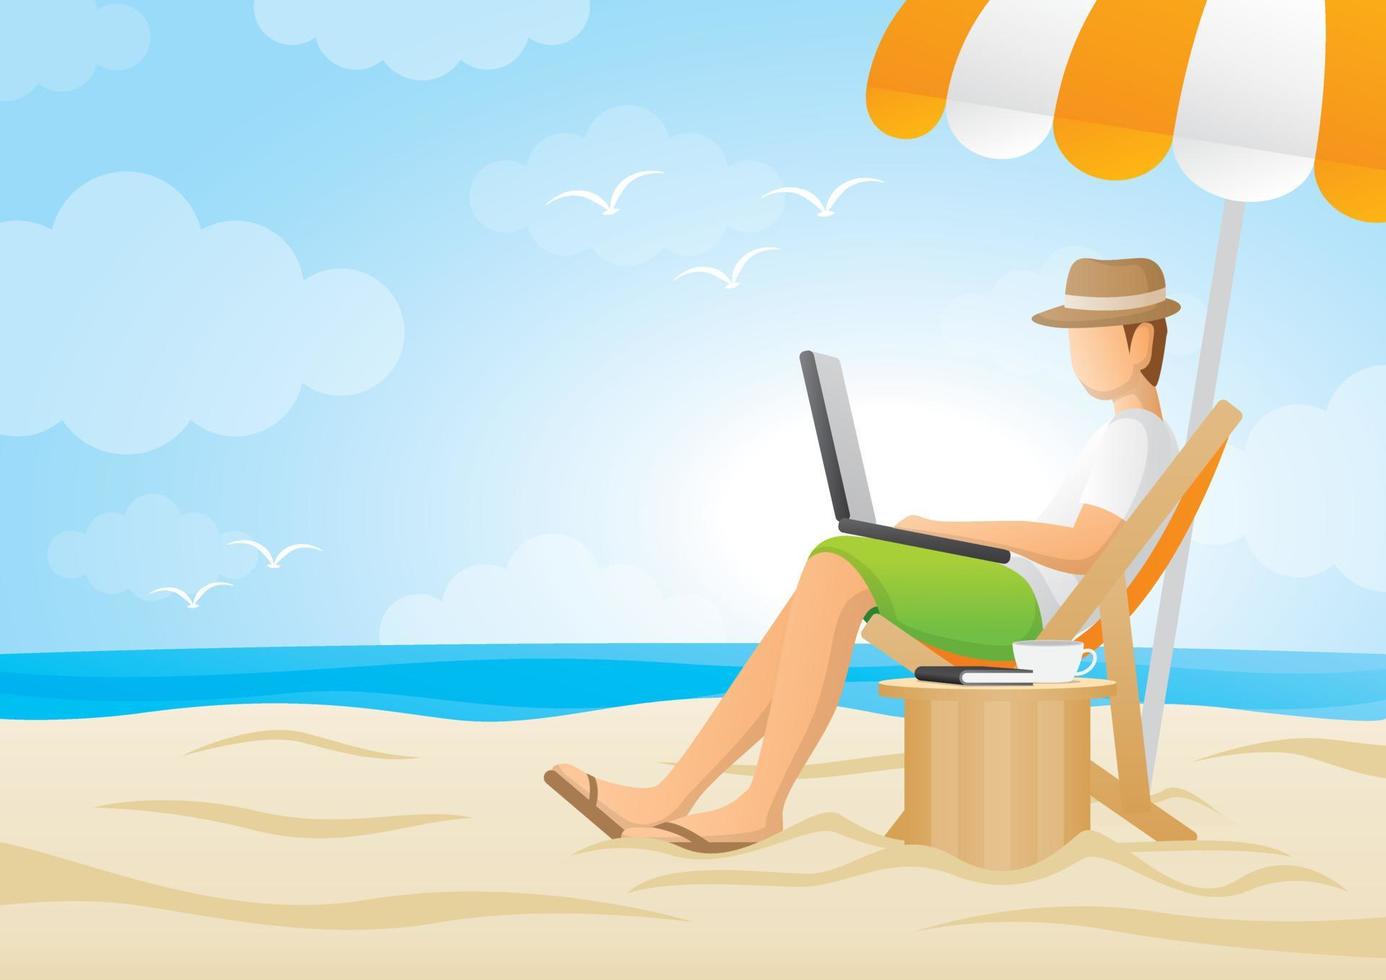 a man is working on laptop at beach with blue sky and orange parasol. workation illustration vector. vector